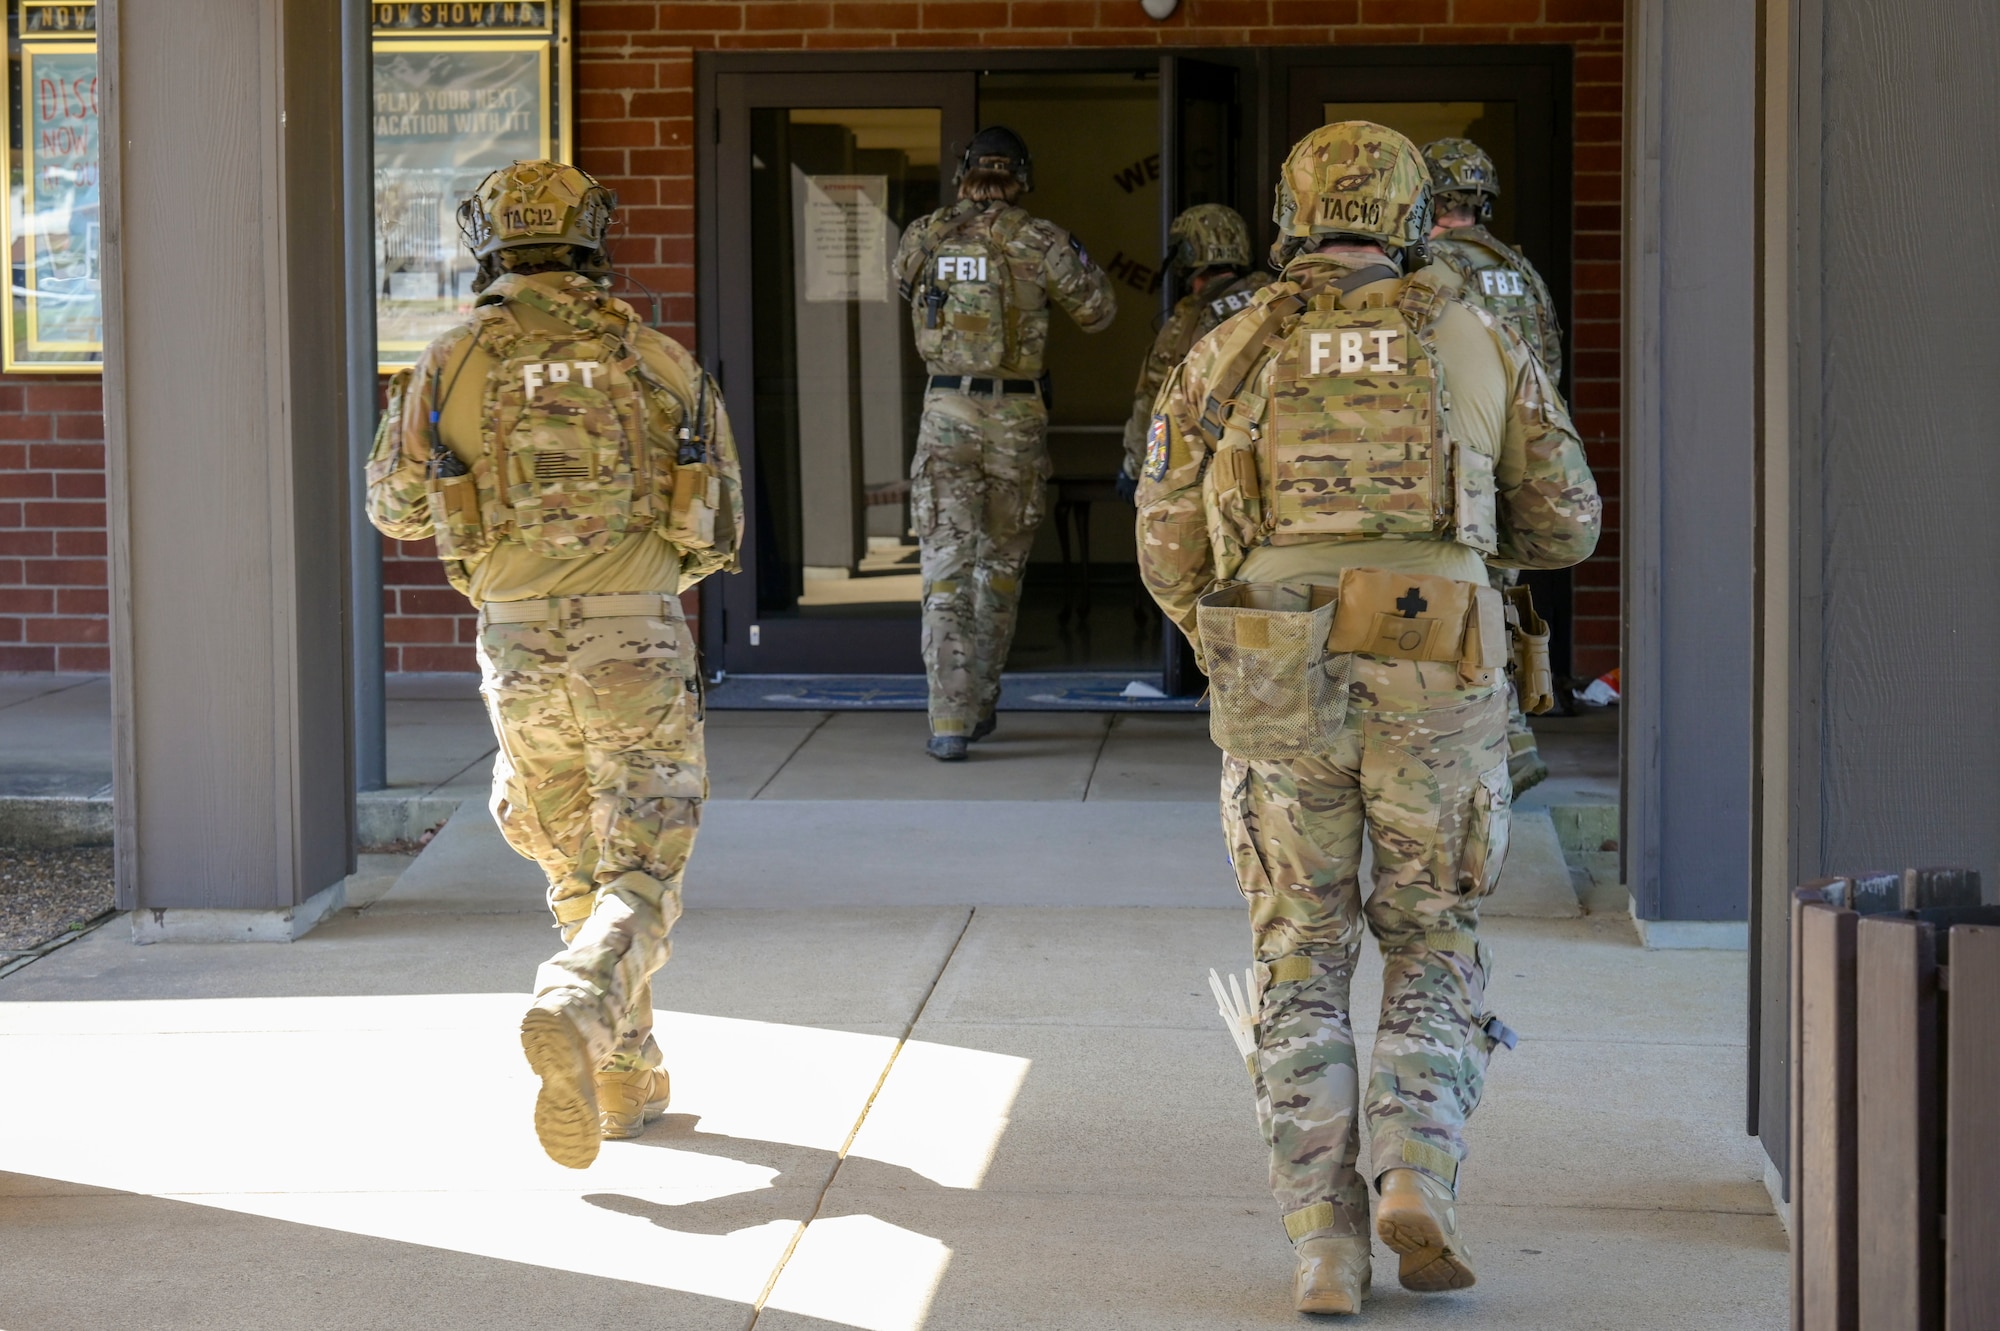 Members of the Federal Bureau of Investigation SWAT team prepare to enter a building